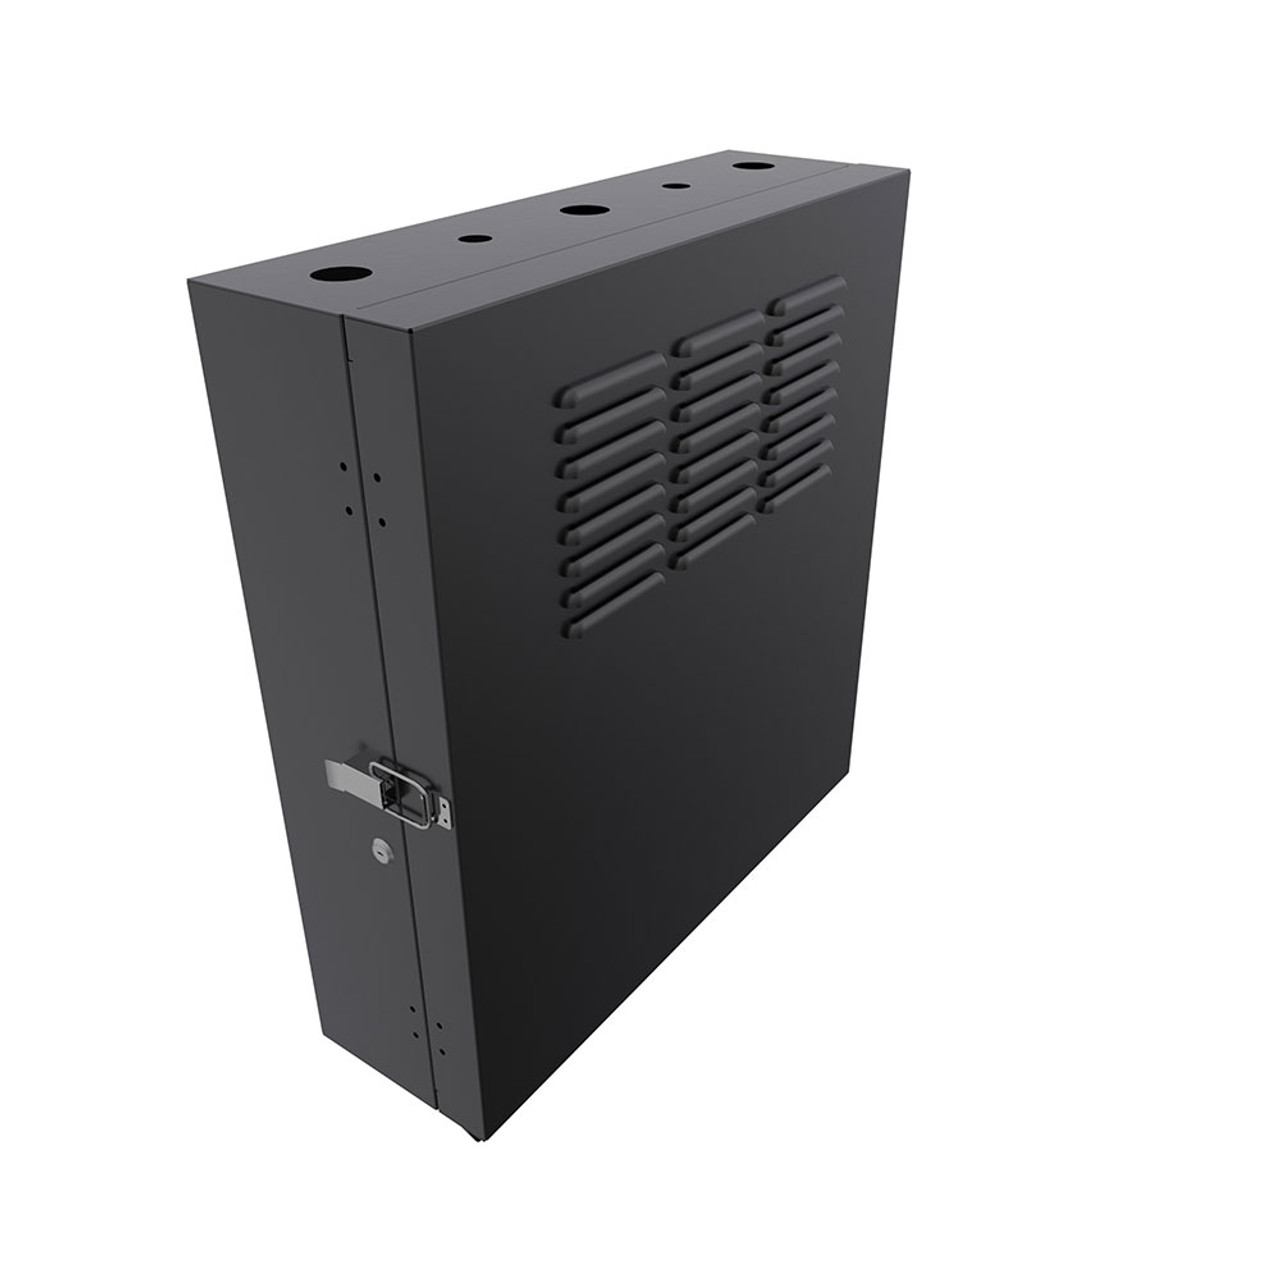 4U Vertical Wall Mount Enclosure, 16.7 inch (425mm) to 19.6 inch (500mm) depth, Cold-rolled Steel, Black